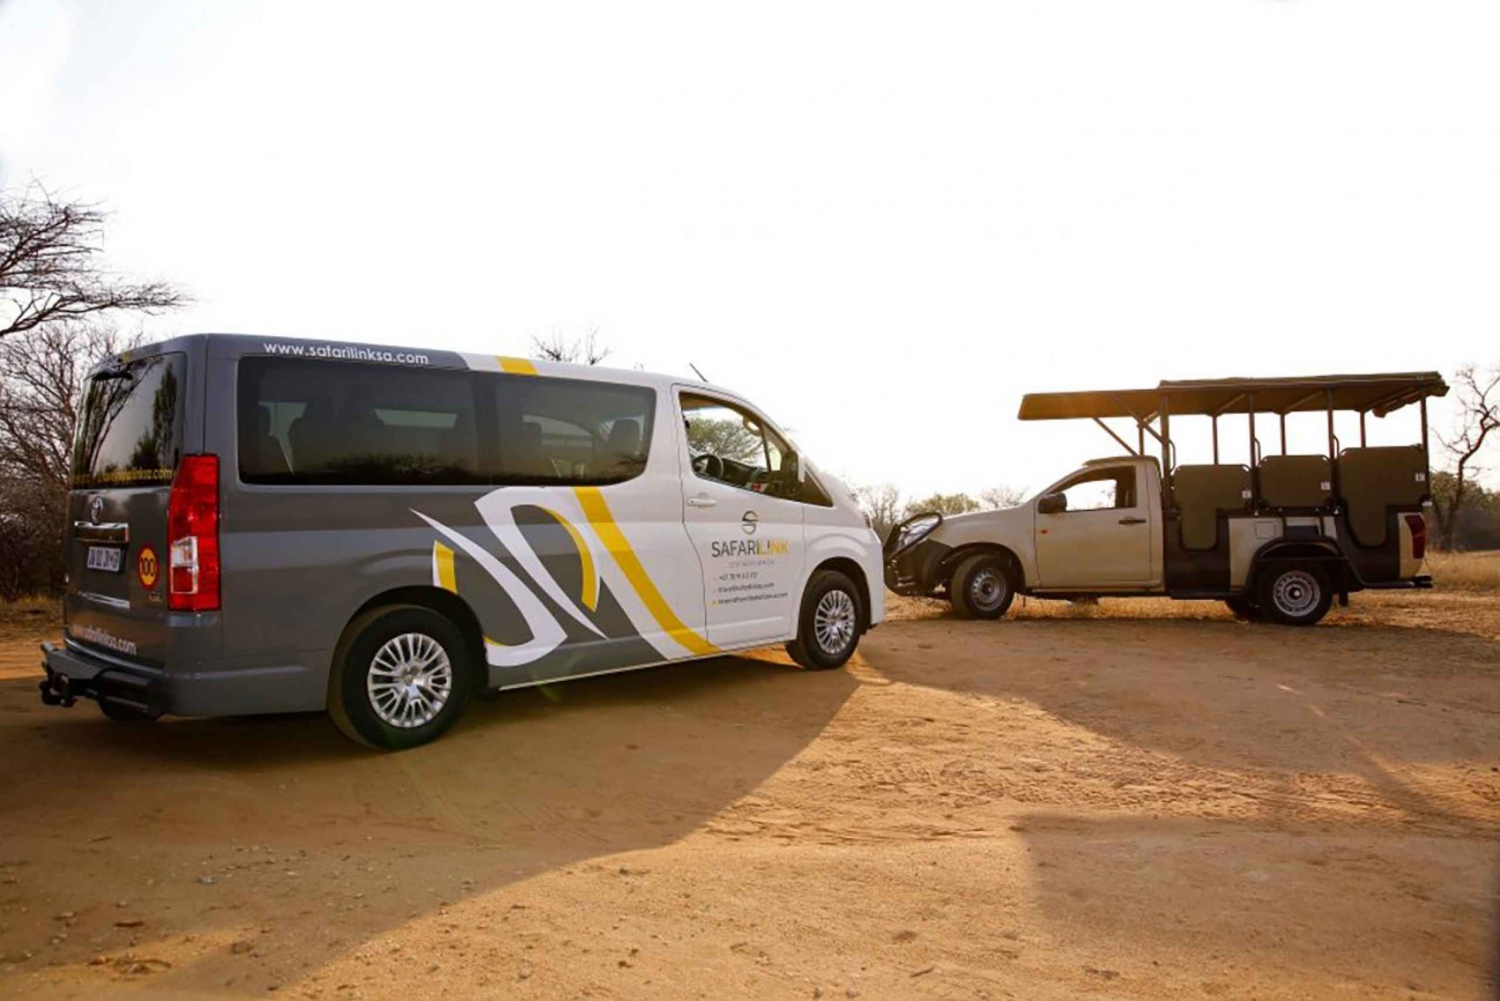 From Johannesburg: One-Way Shared Shuttle to Hazyview